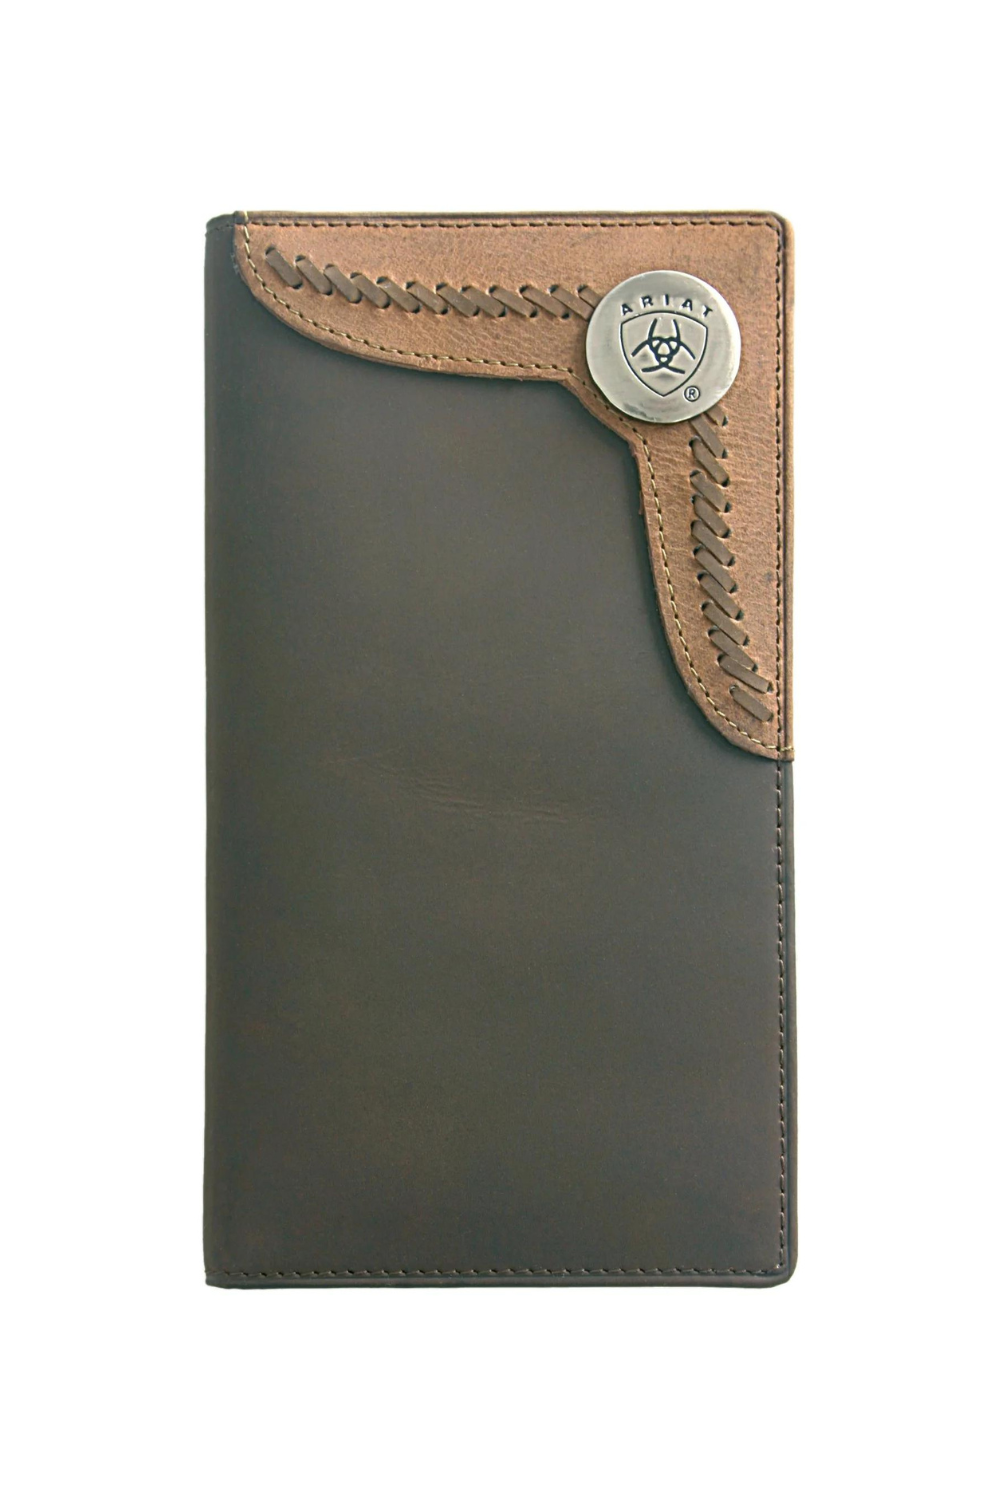 Rodeo Wallet -Two Toned Accent